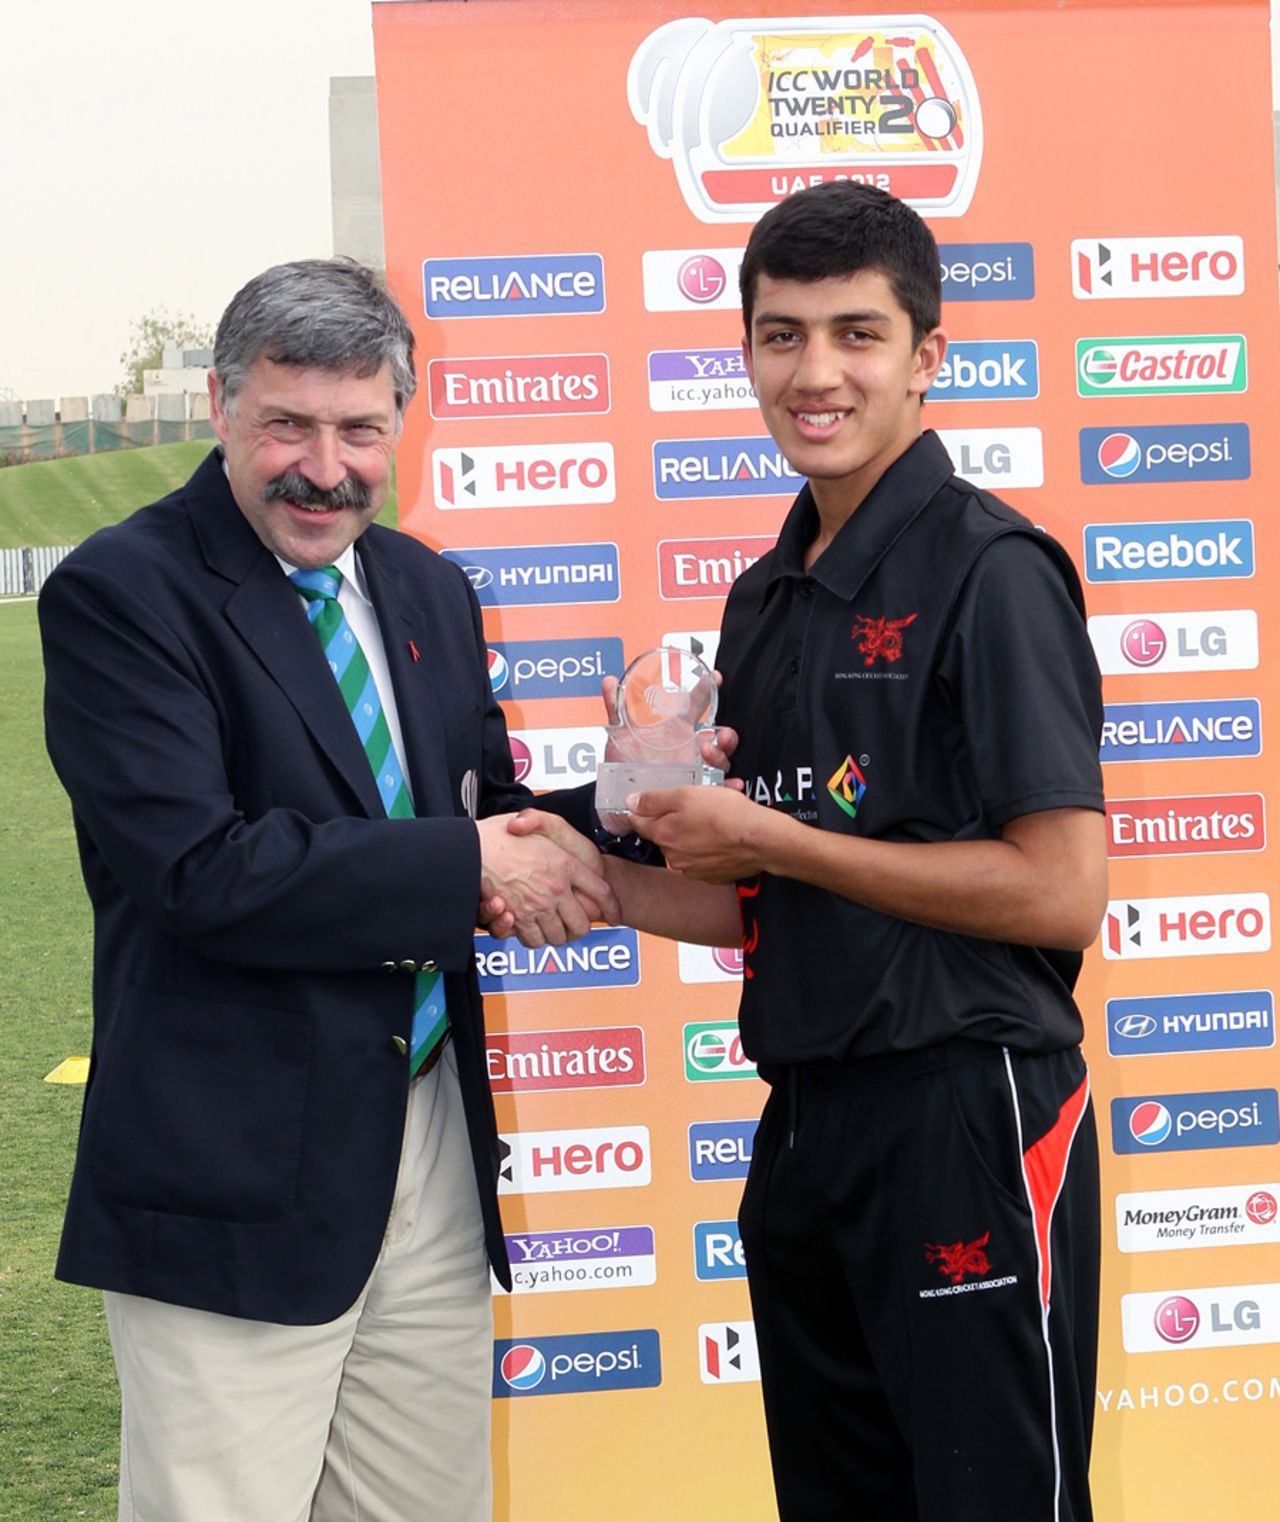 Aizaz Khan collects his Man of the Match Award from Match Referee David Jukes for his spell of 5-25 against USA during the ICC World Twenty20 Qualifier 11th Place Play-off played at the ICC Global Cricket Academy ground in Dubai on 23rd March 2012